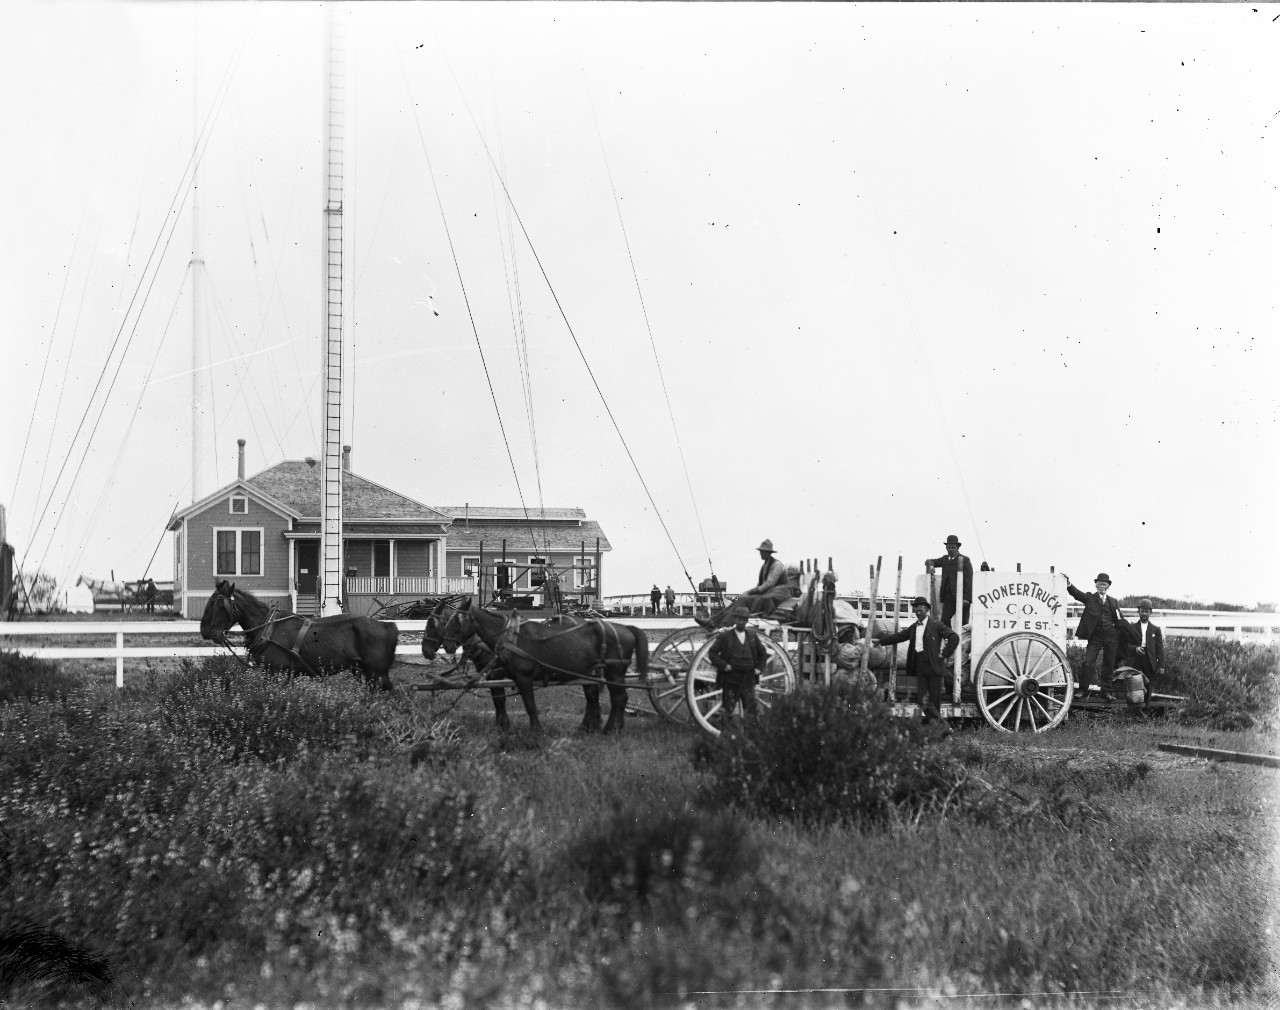 <p>Horses and wagon at the Point Loma (San Diego) Naval Radio Station, 1906. Image is from the UG 21, US Naval California Radio Station Collection.</p>
